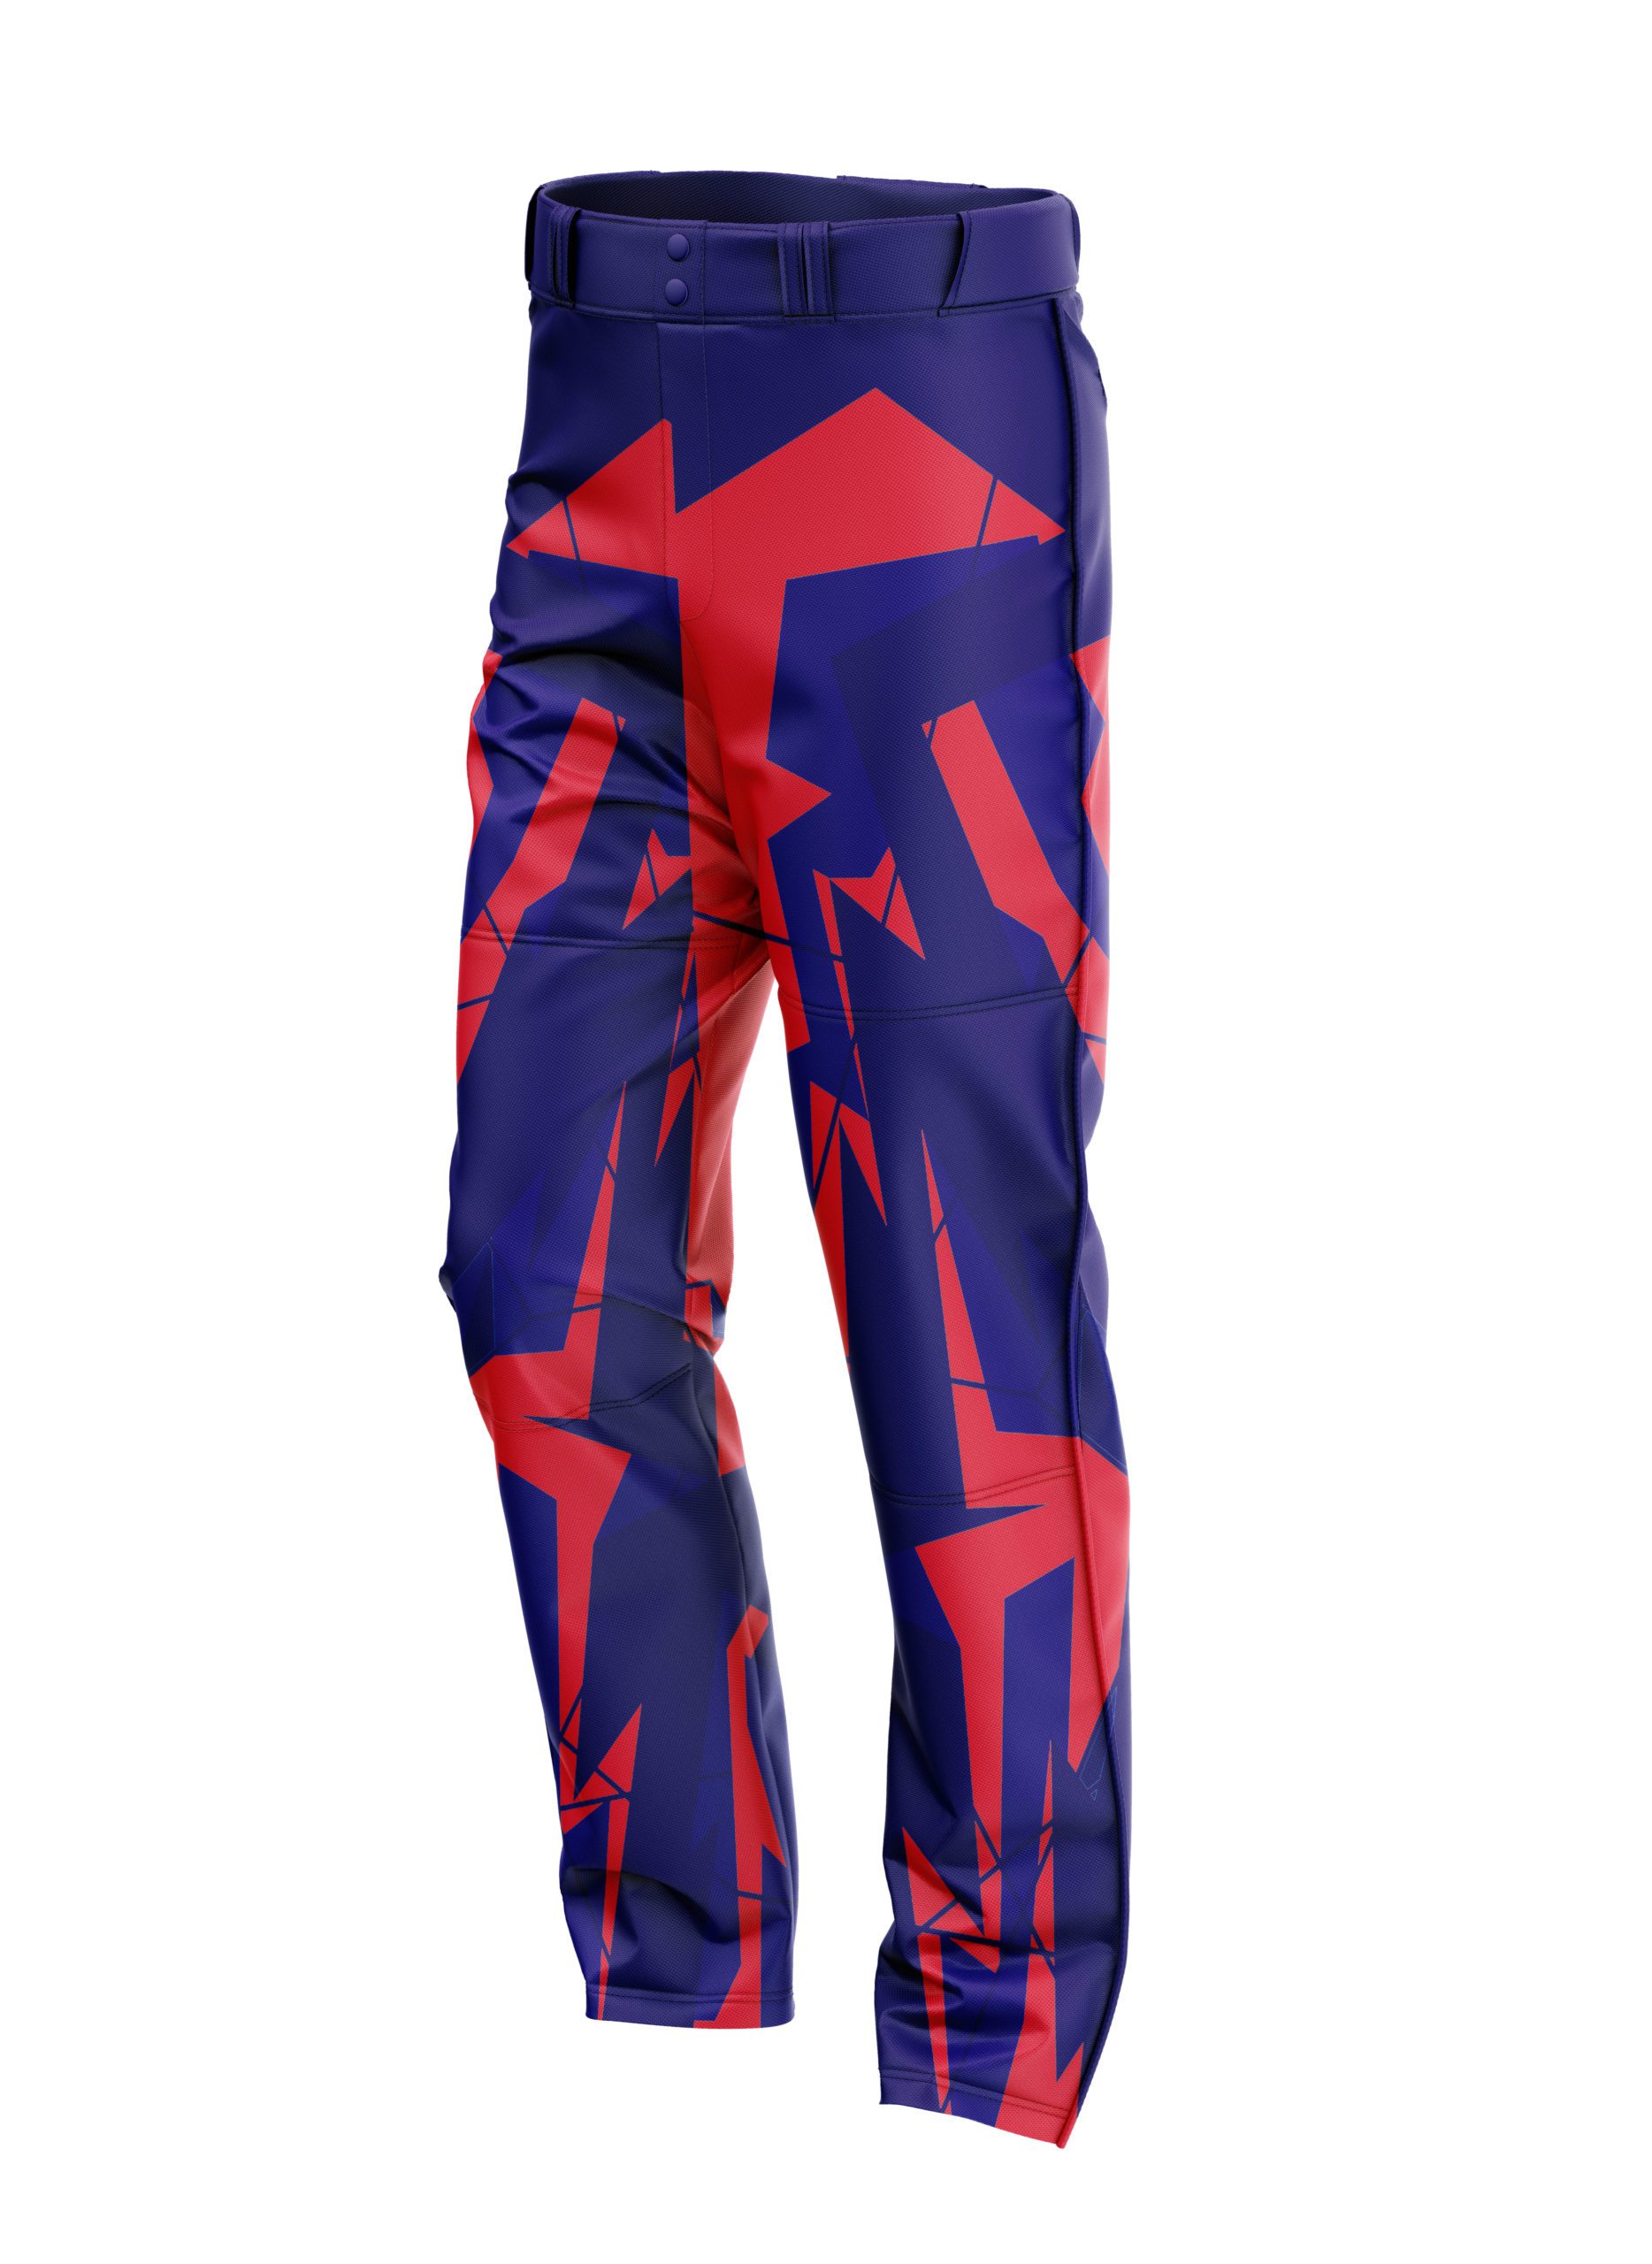 Image of Limited Edition Kyle Troup Fro Cup Replica CoolWick Bowling Pants